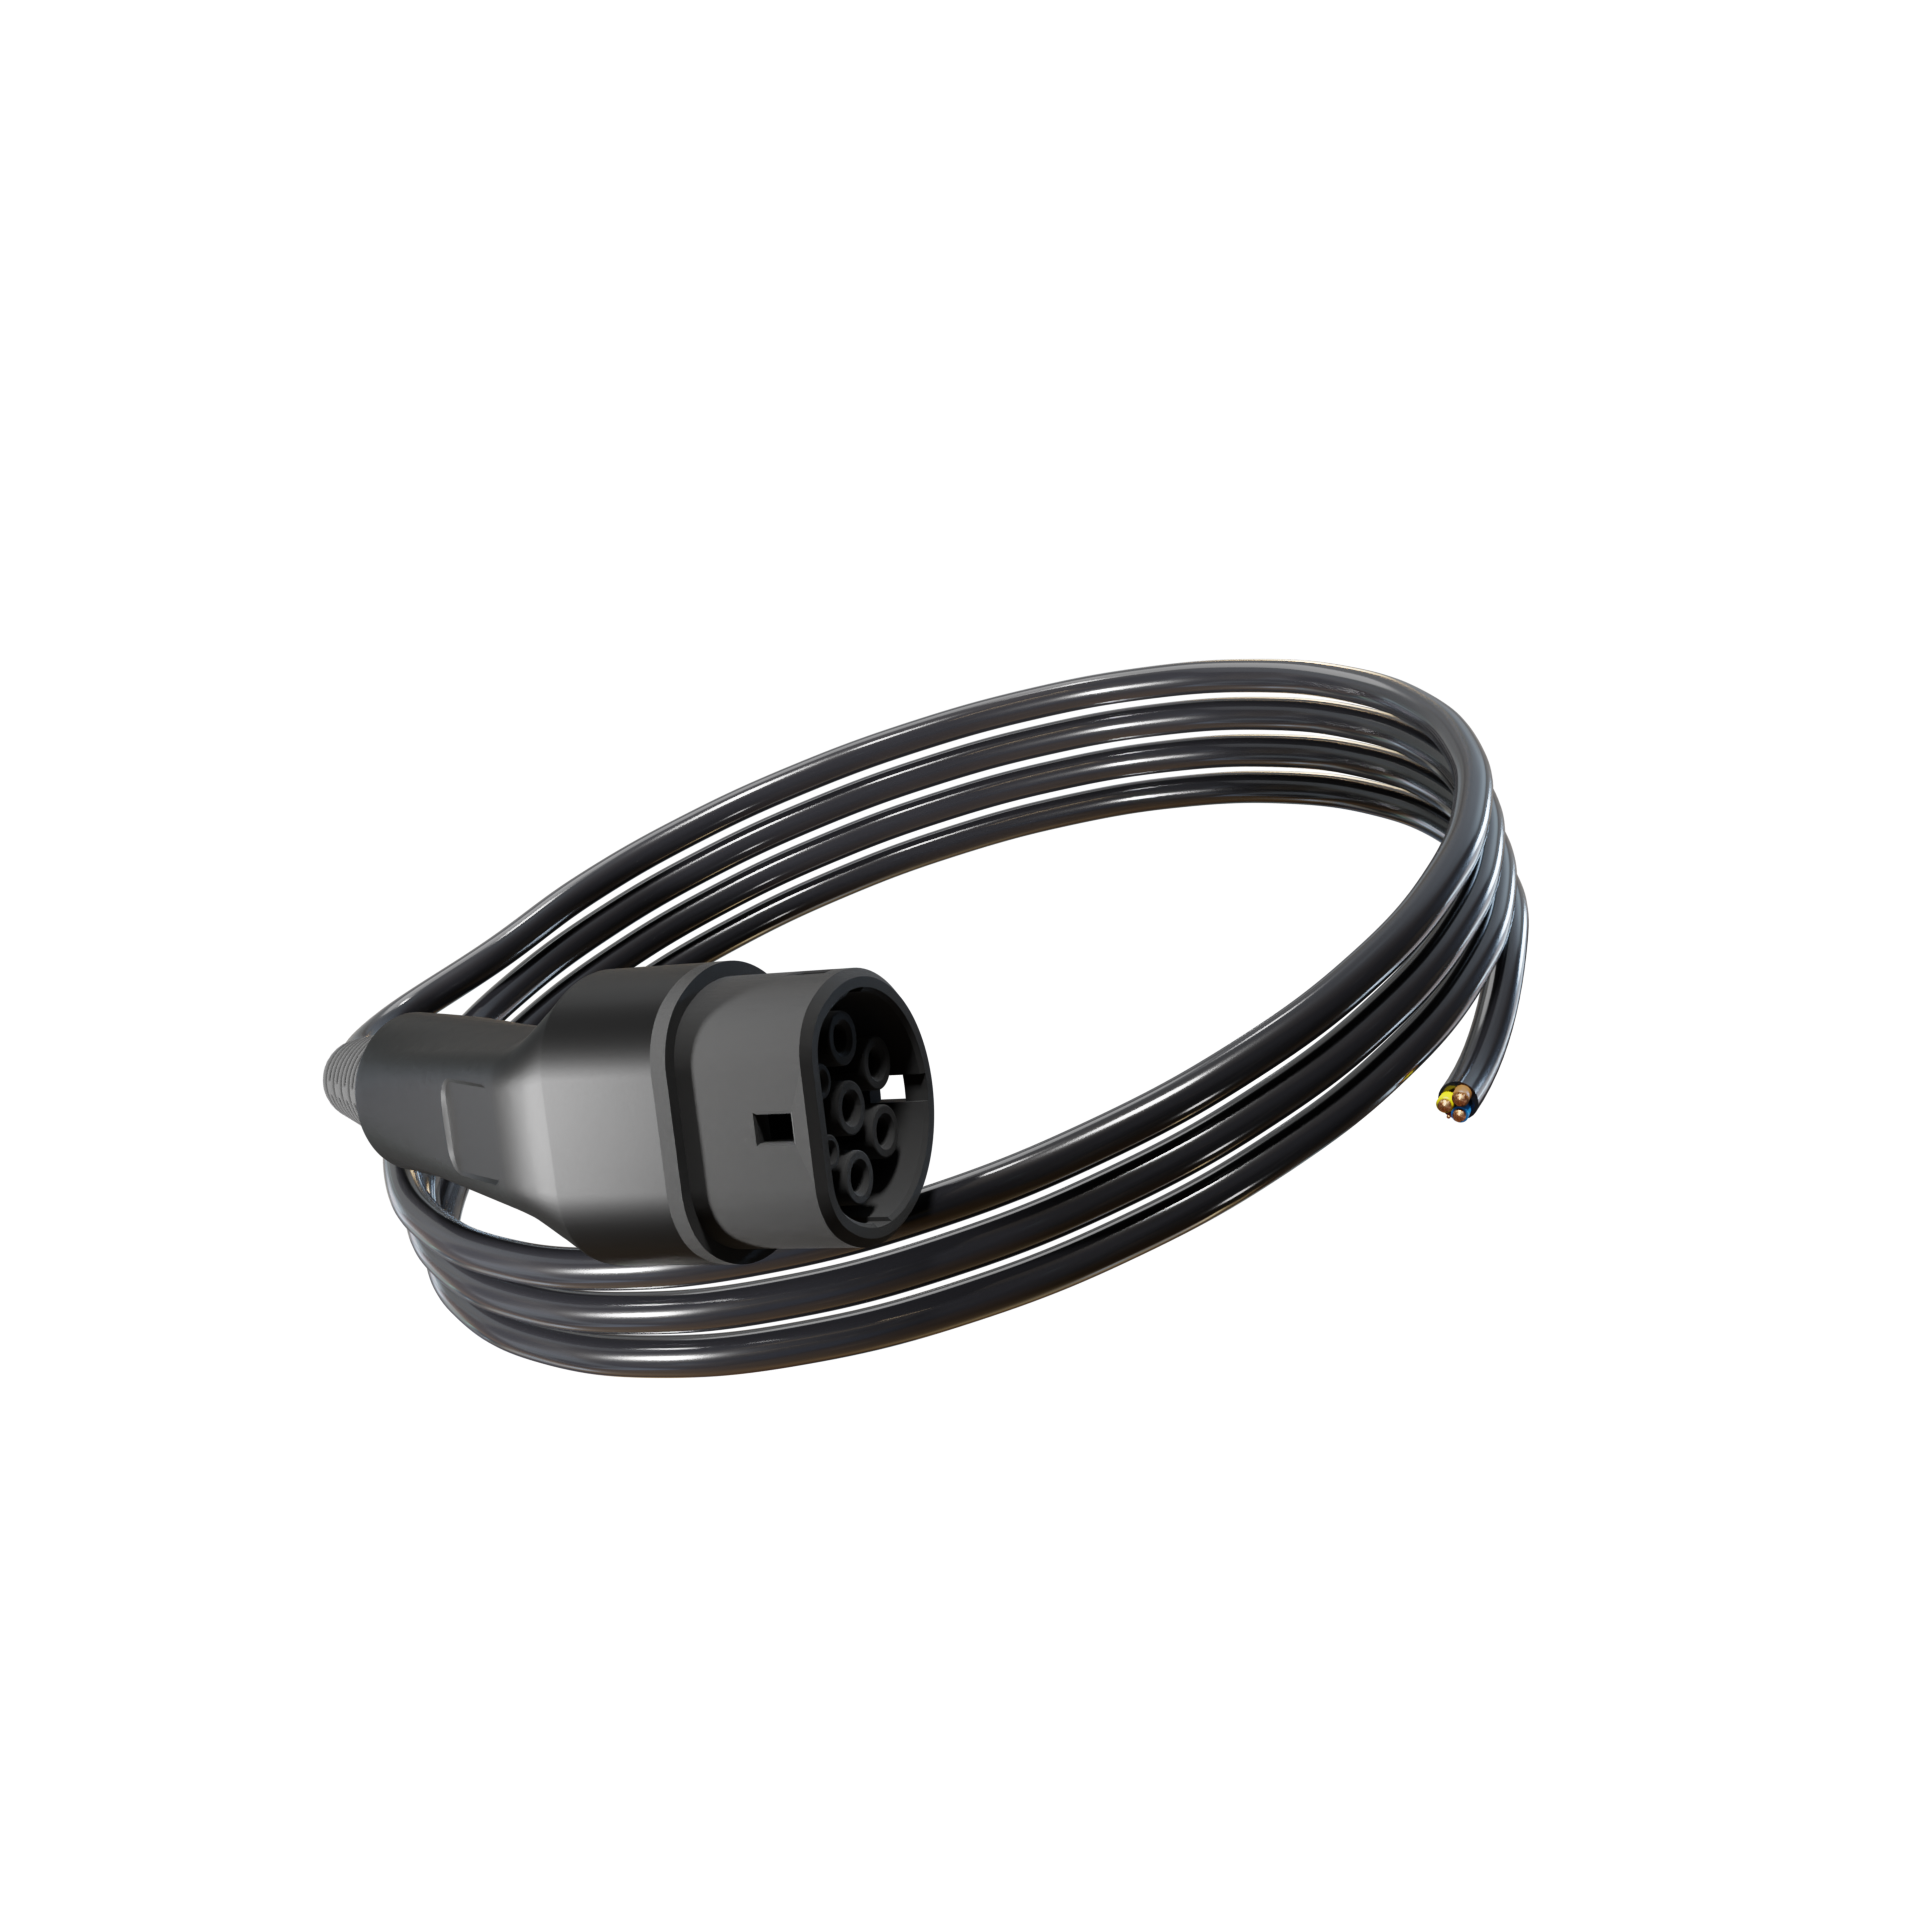 Standard charging cable type 2 (7.4 kW) 5m, black